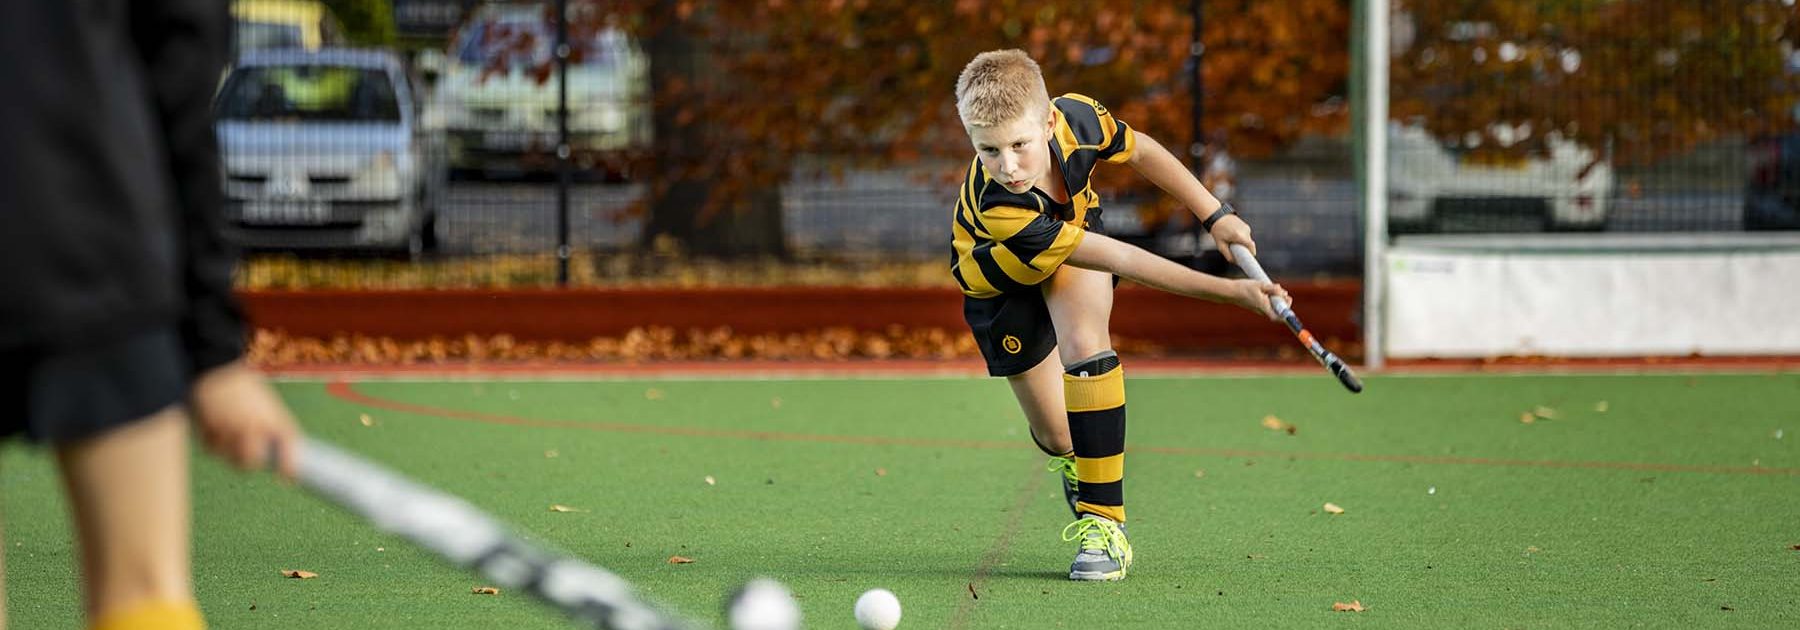 National Hockey Title Win for Lilian dB